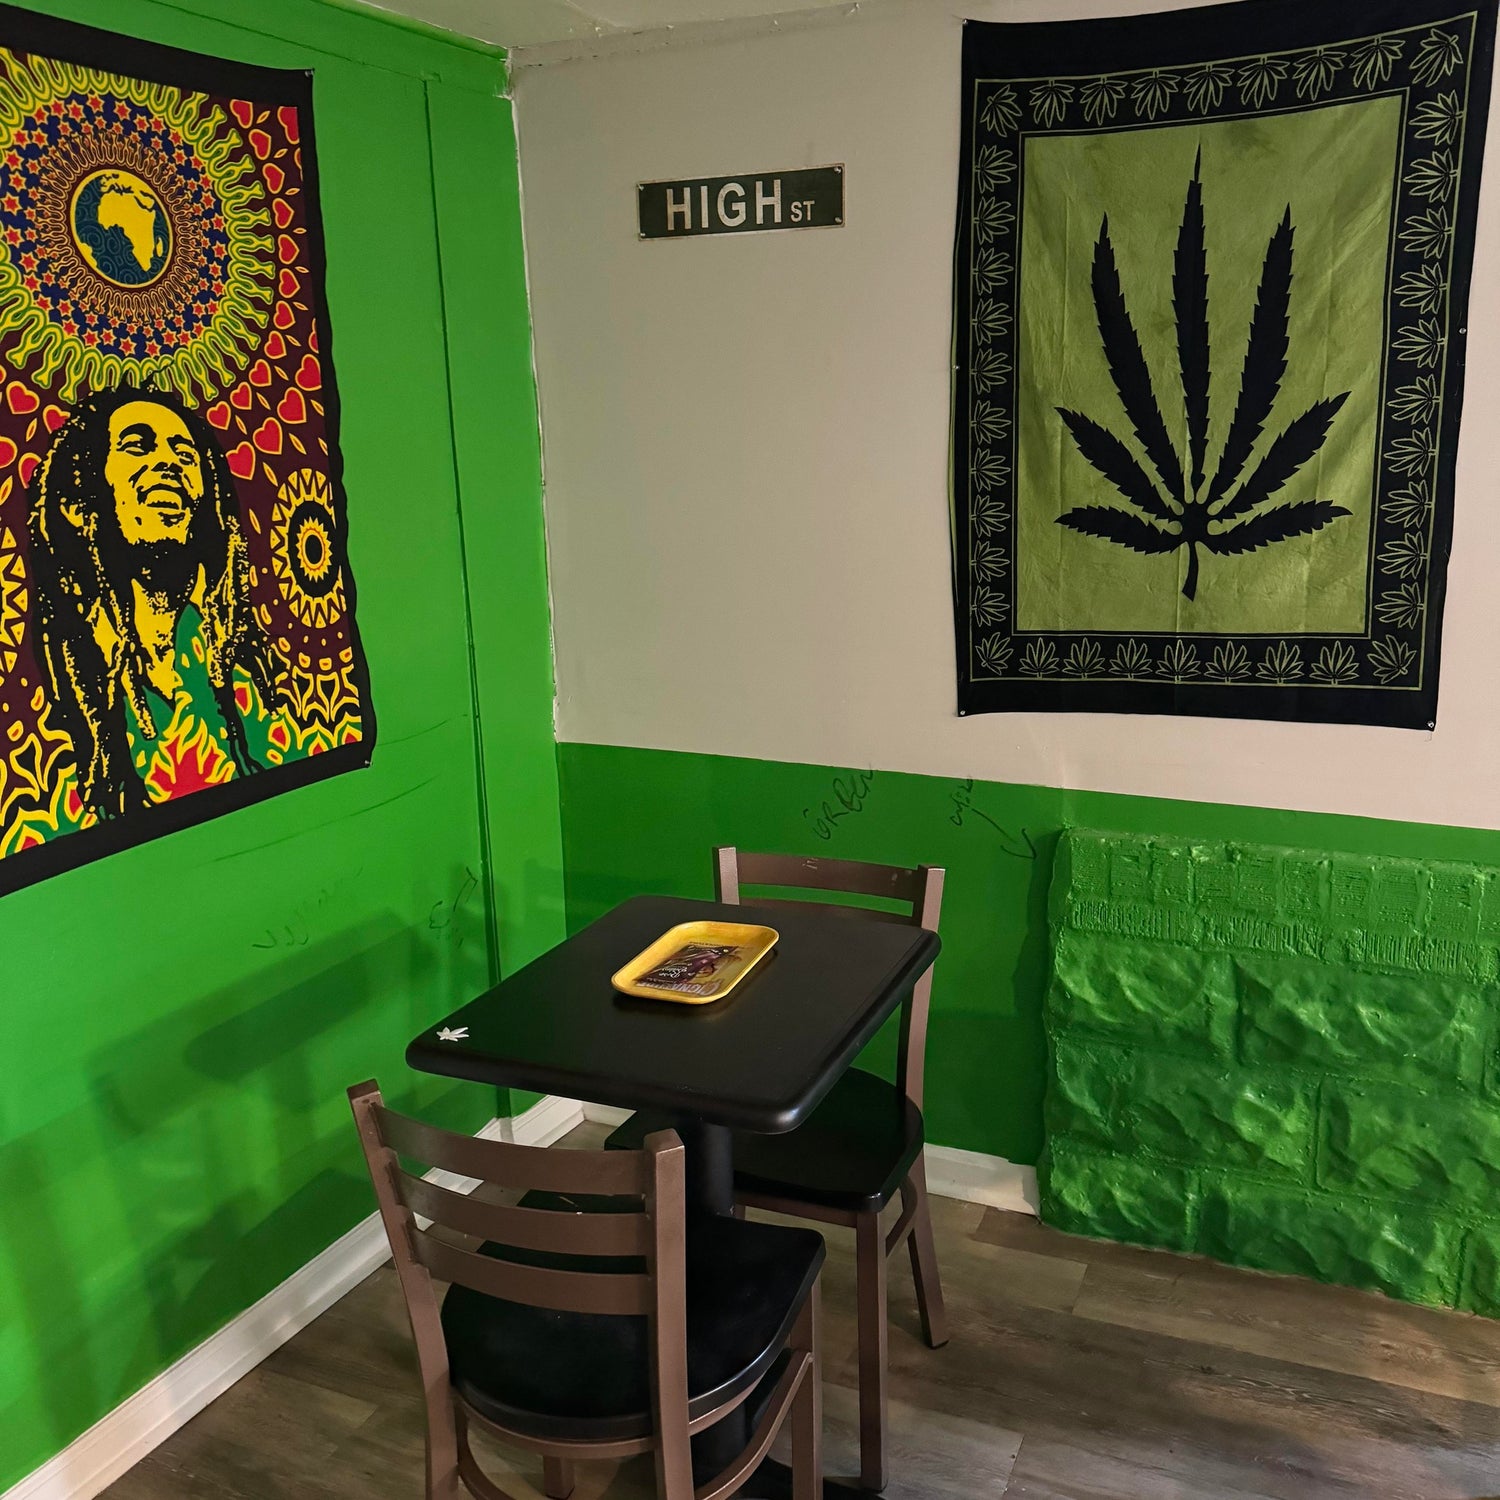 The Exotic Smoker Vape and Smoke Shop - Rental Venue 4 - Tabel and chairs with bob marly imagery and a hemp leaf on the wall with a high street sign